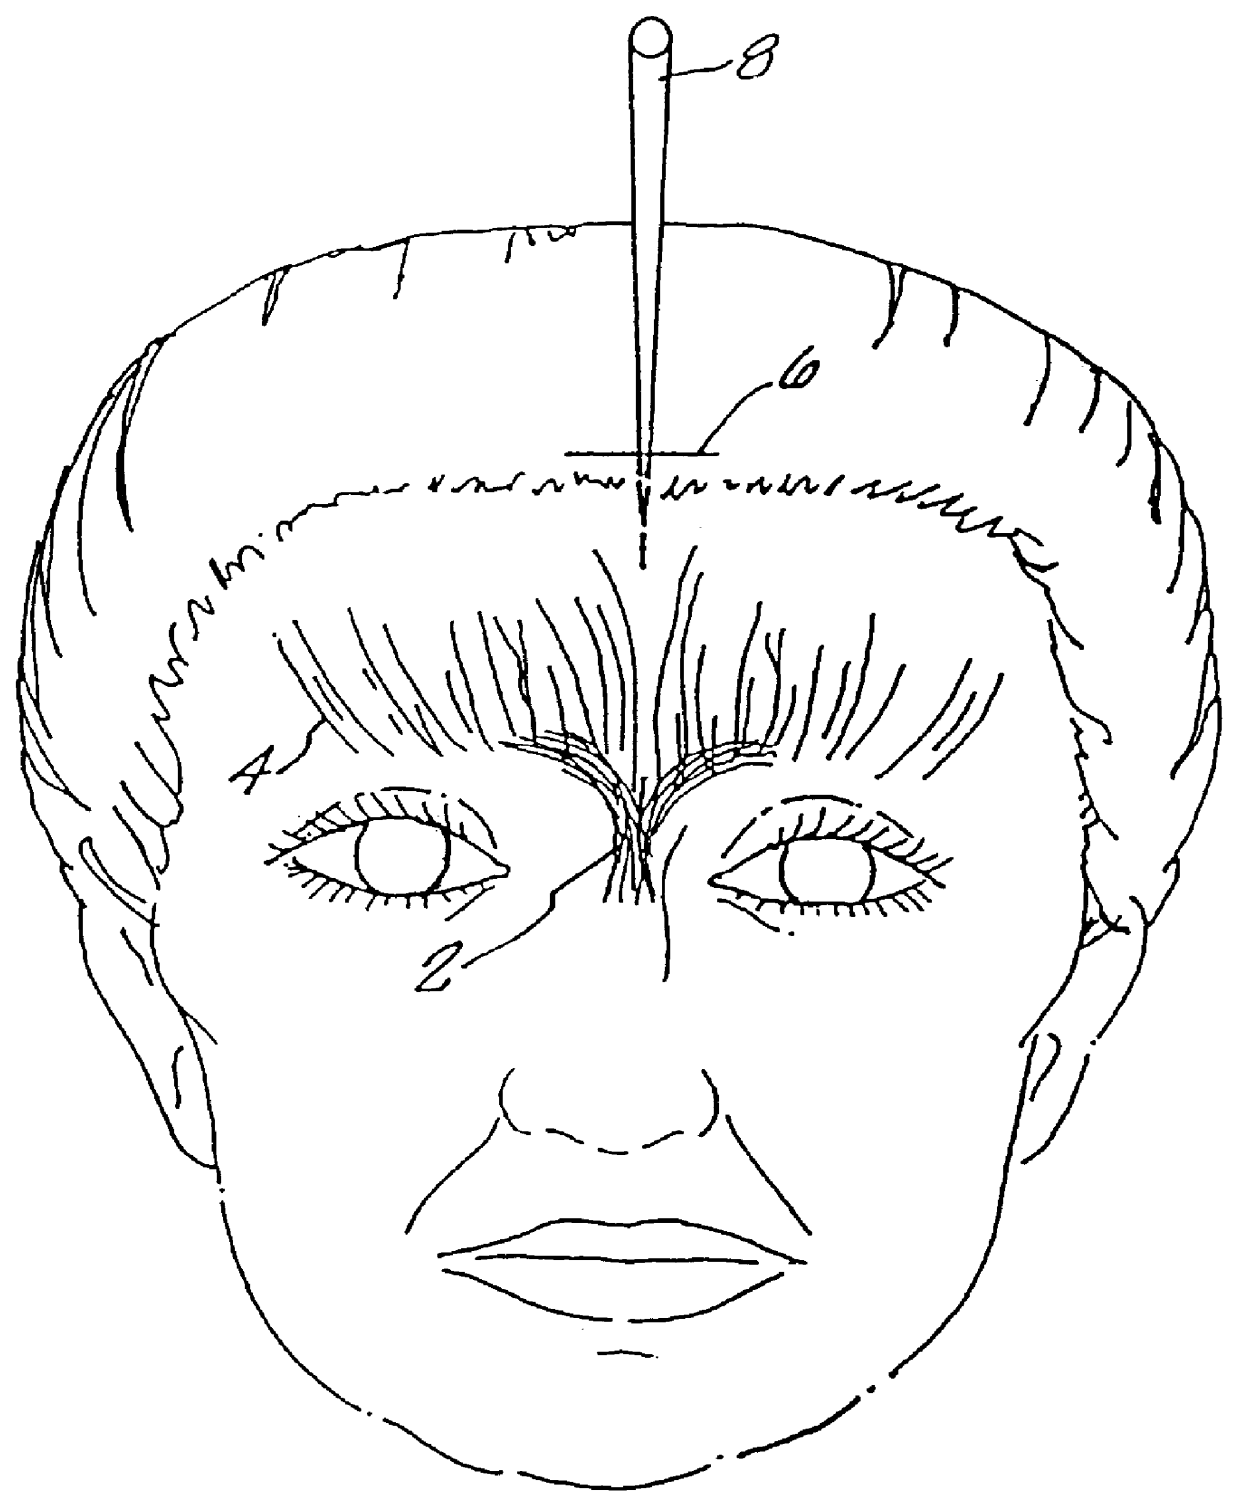 Method of laser cosmetic surgery